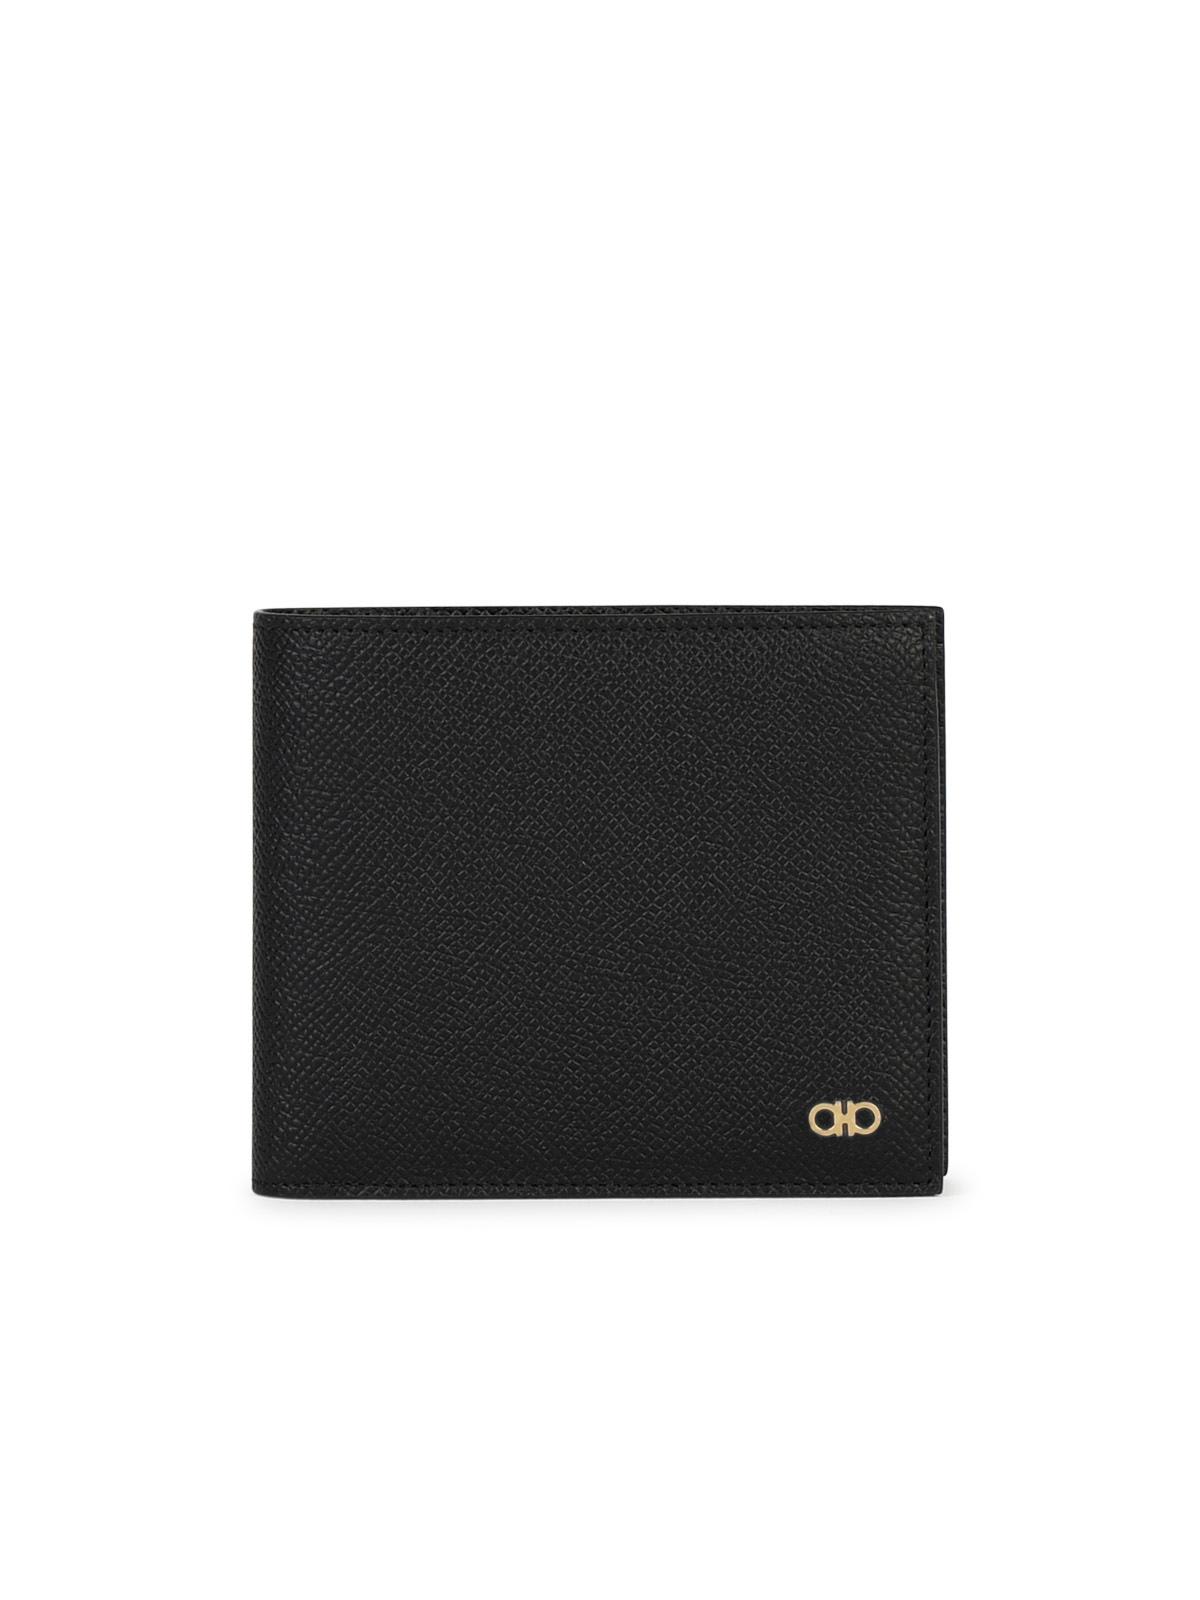 micro Black Leather Wallet